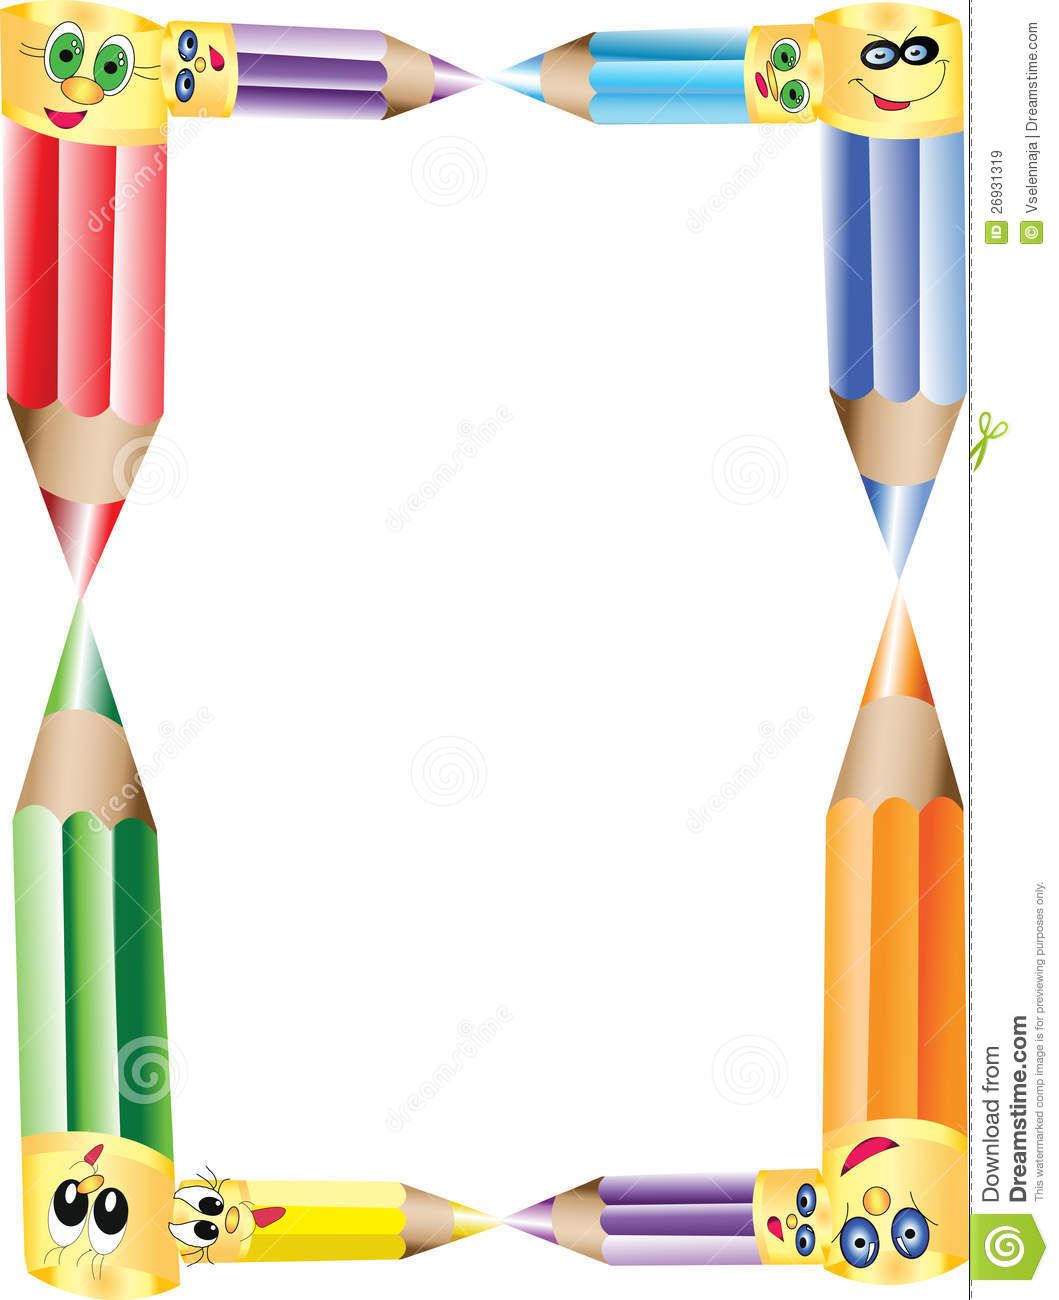 Pencils Border Or Frame Royalty Free Stock Images